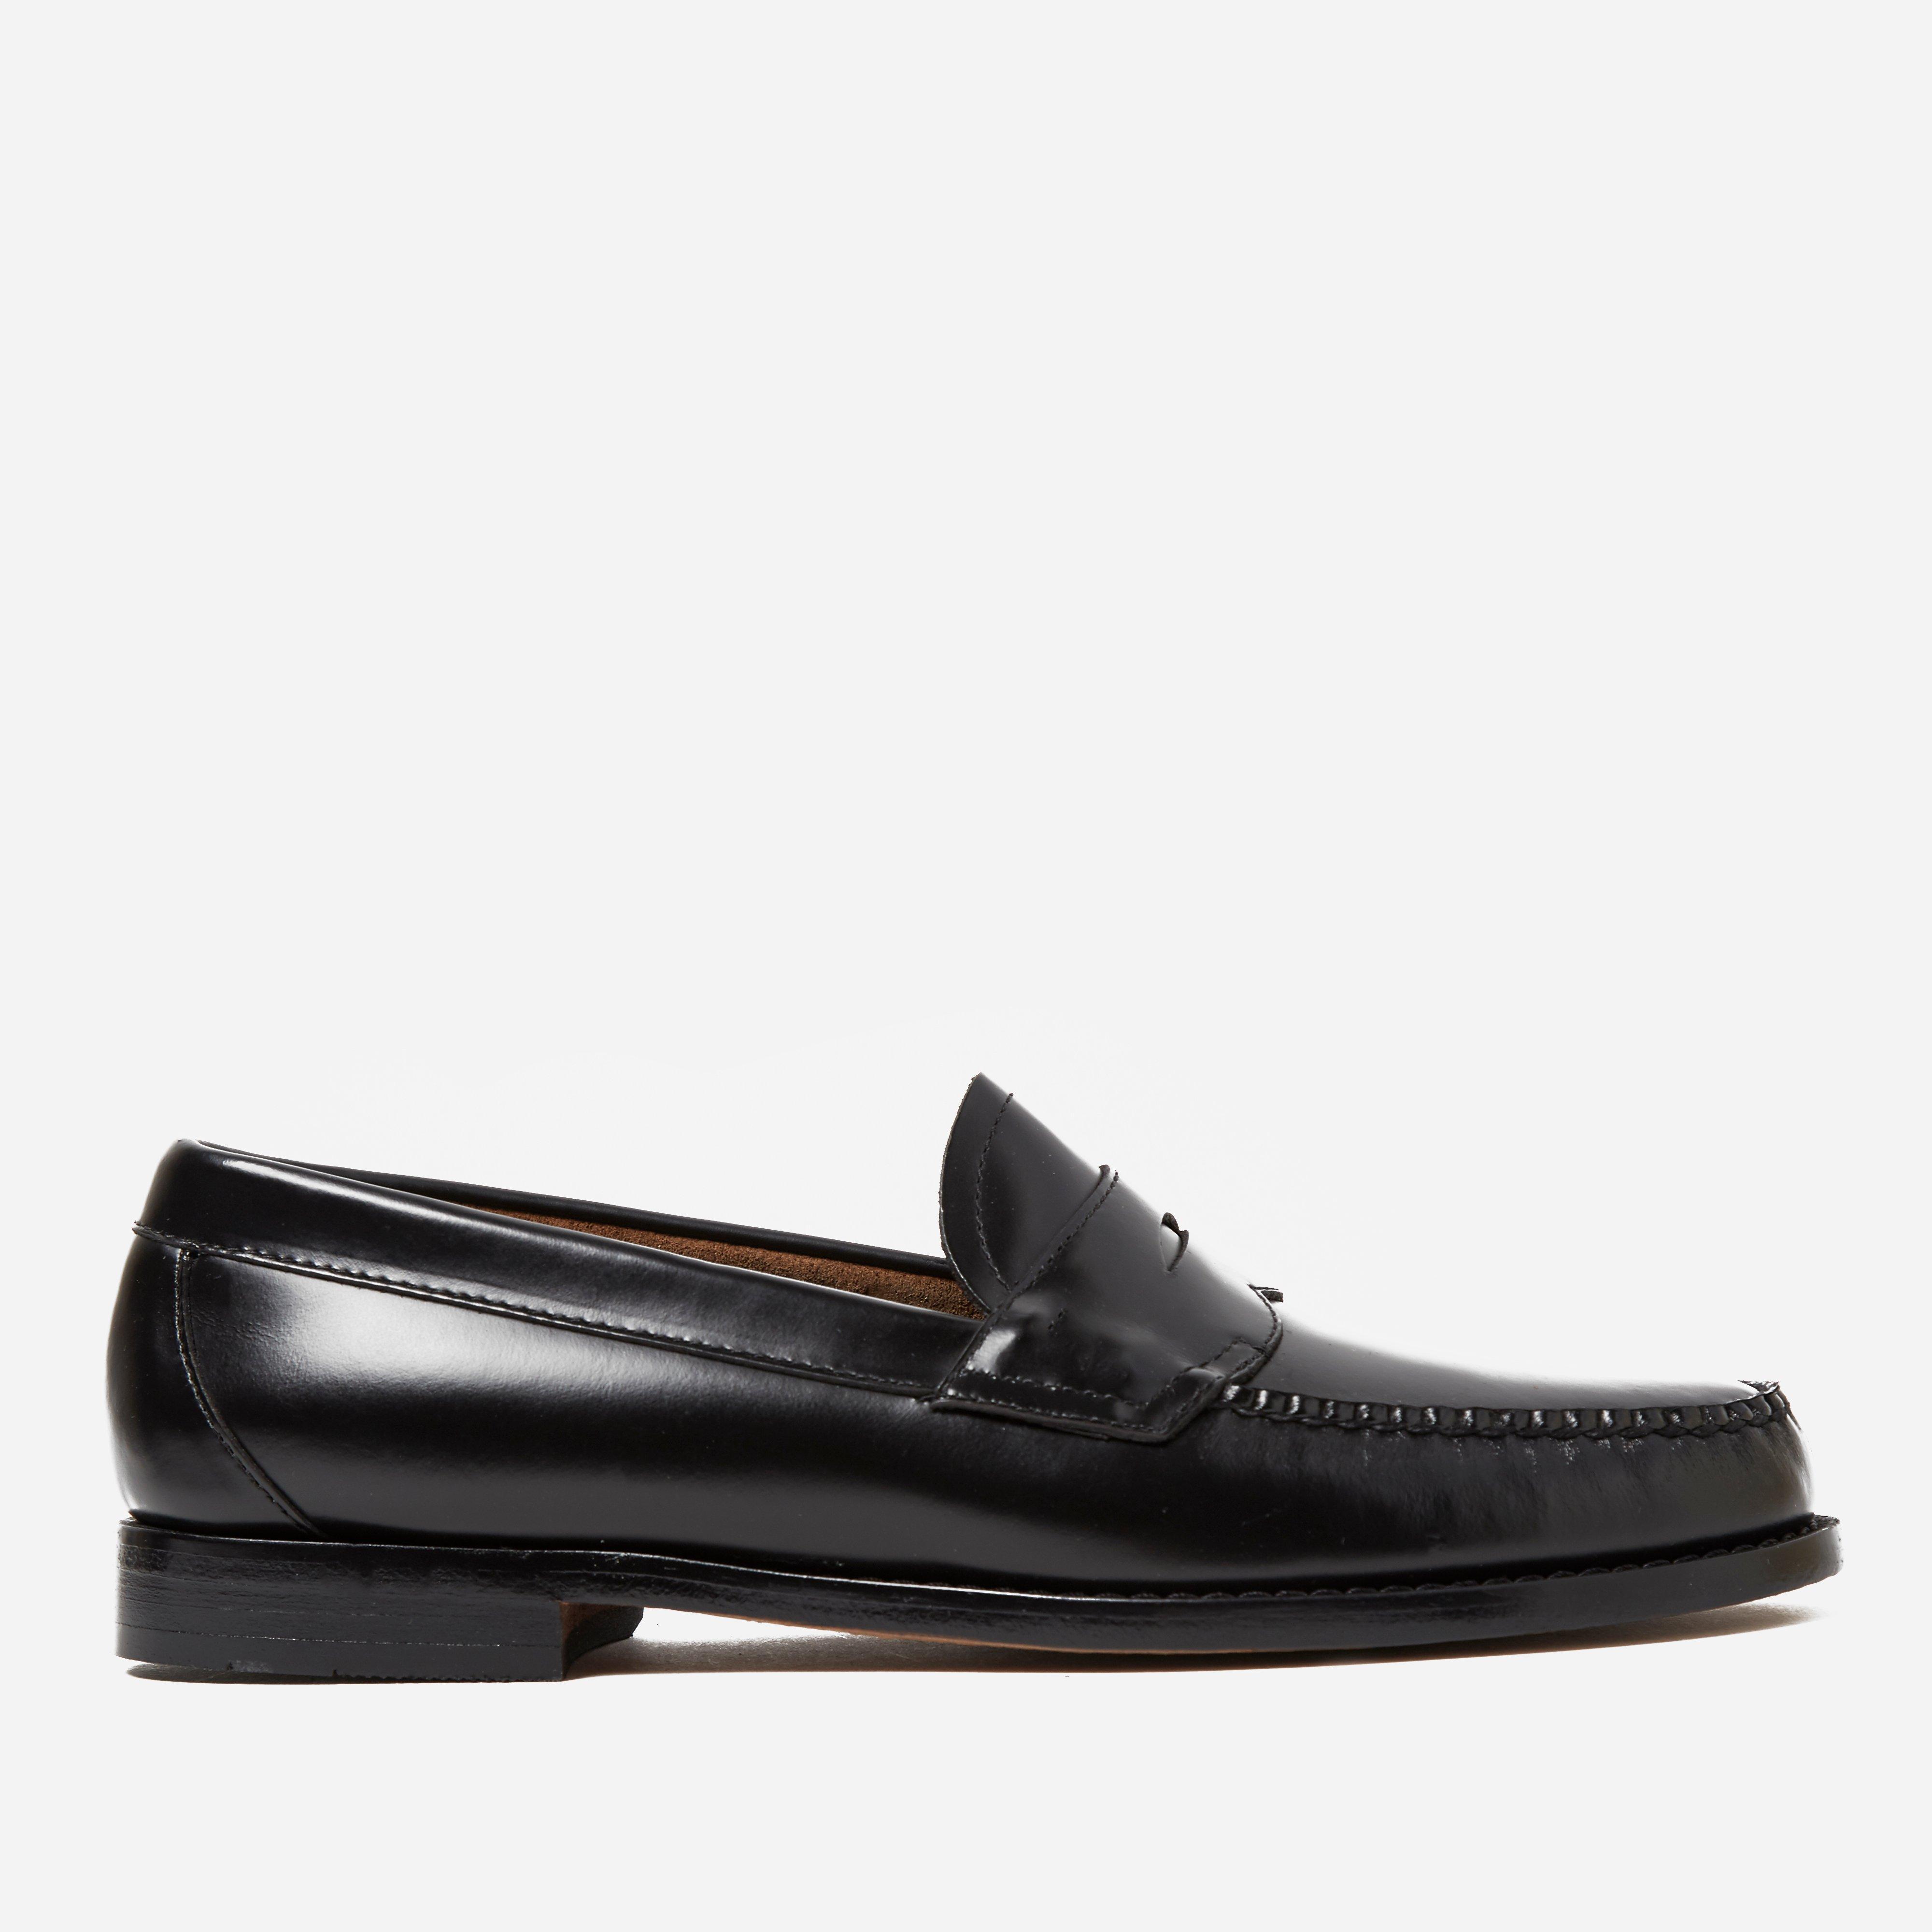 G.H.BASS Leather Bass Weejun Logan Penny Loafer in Black for Men - Lyst